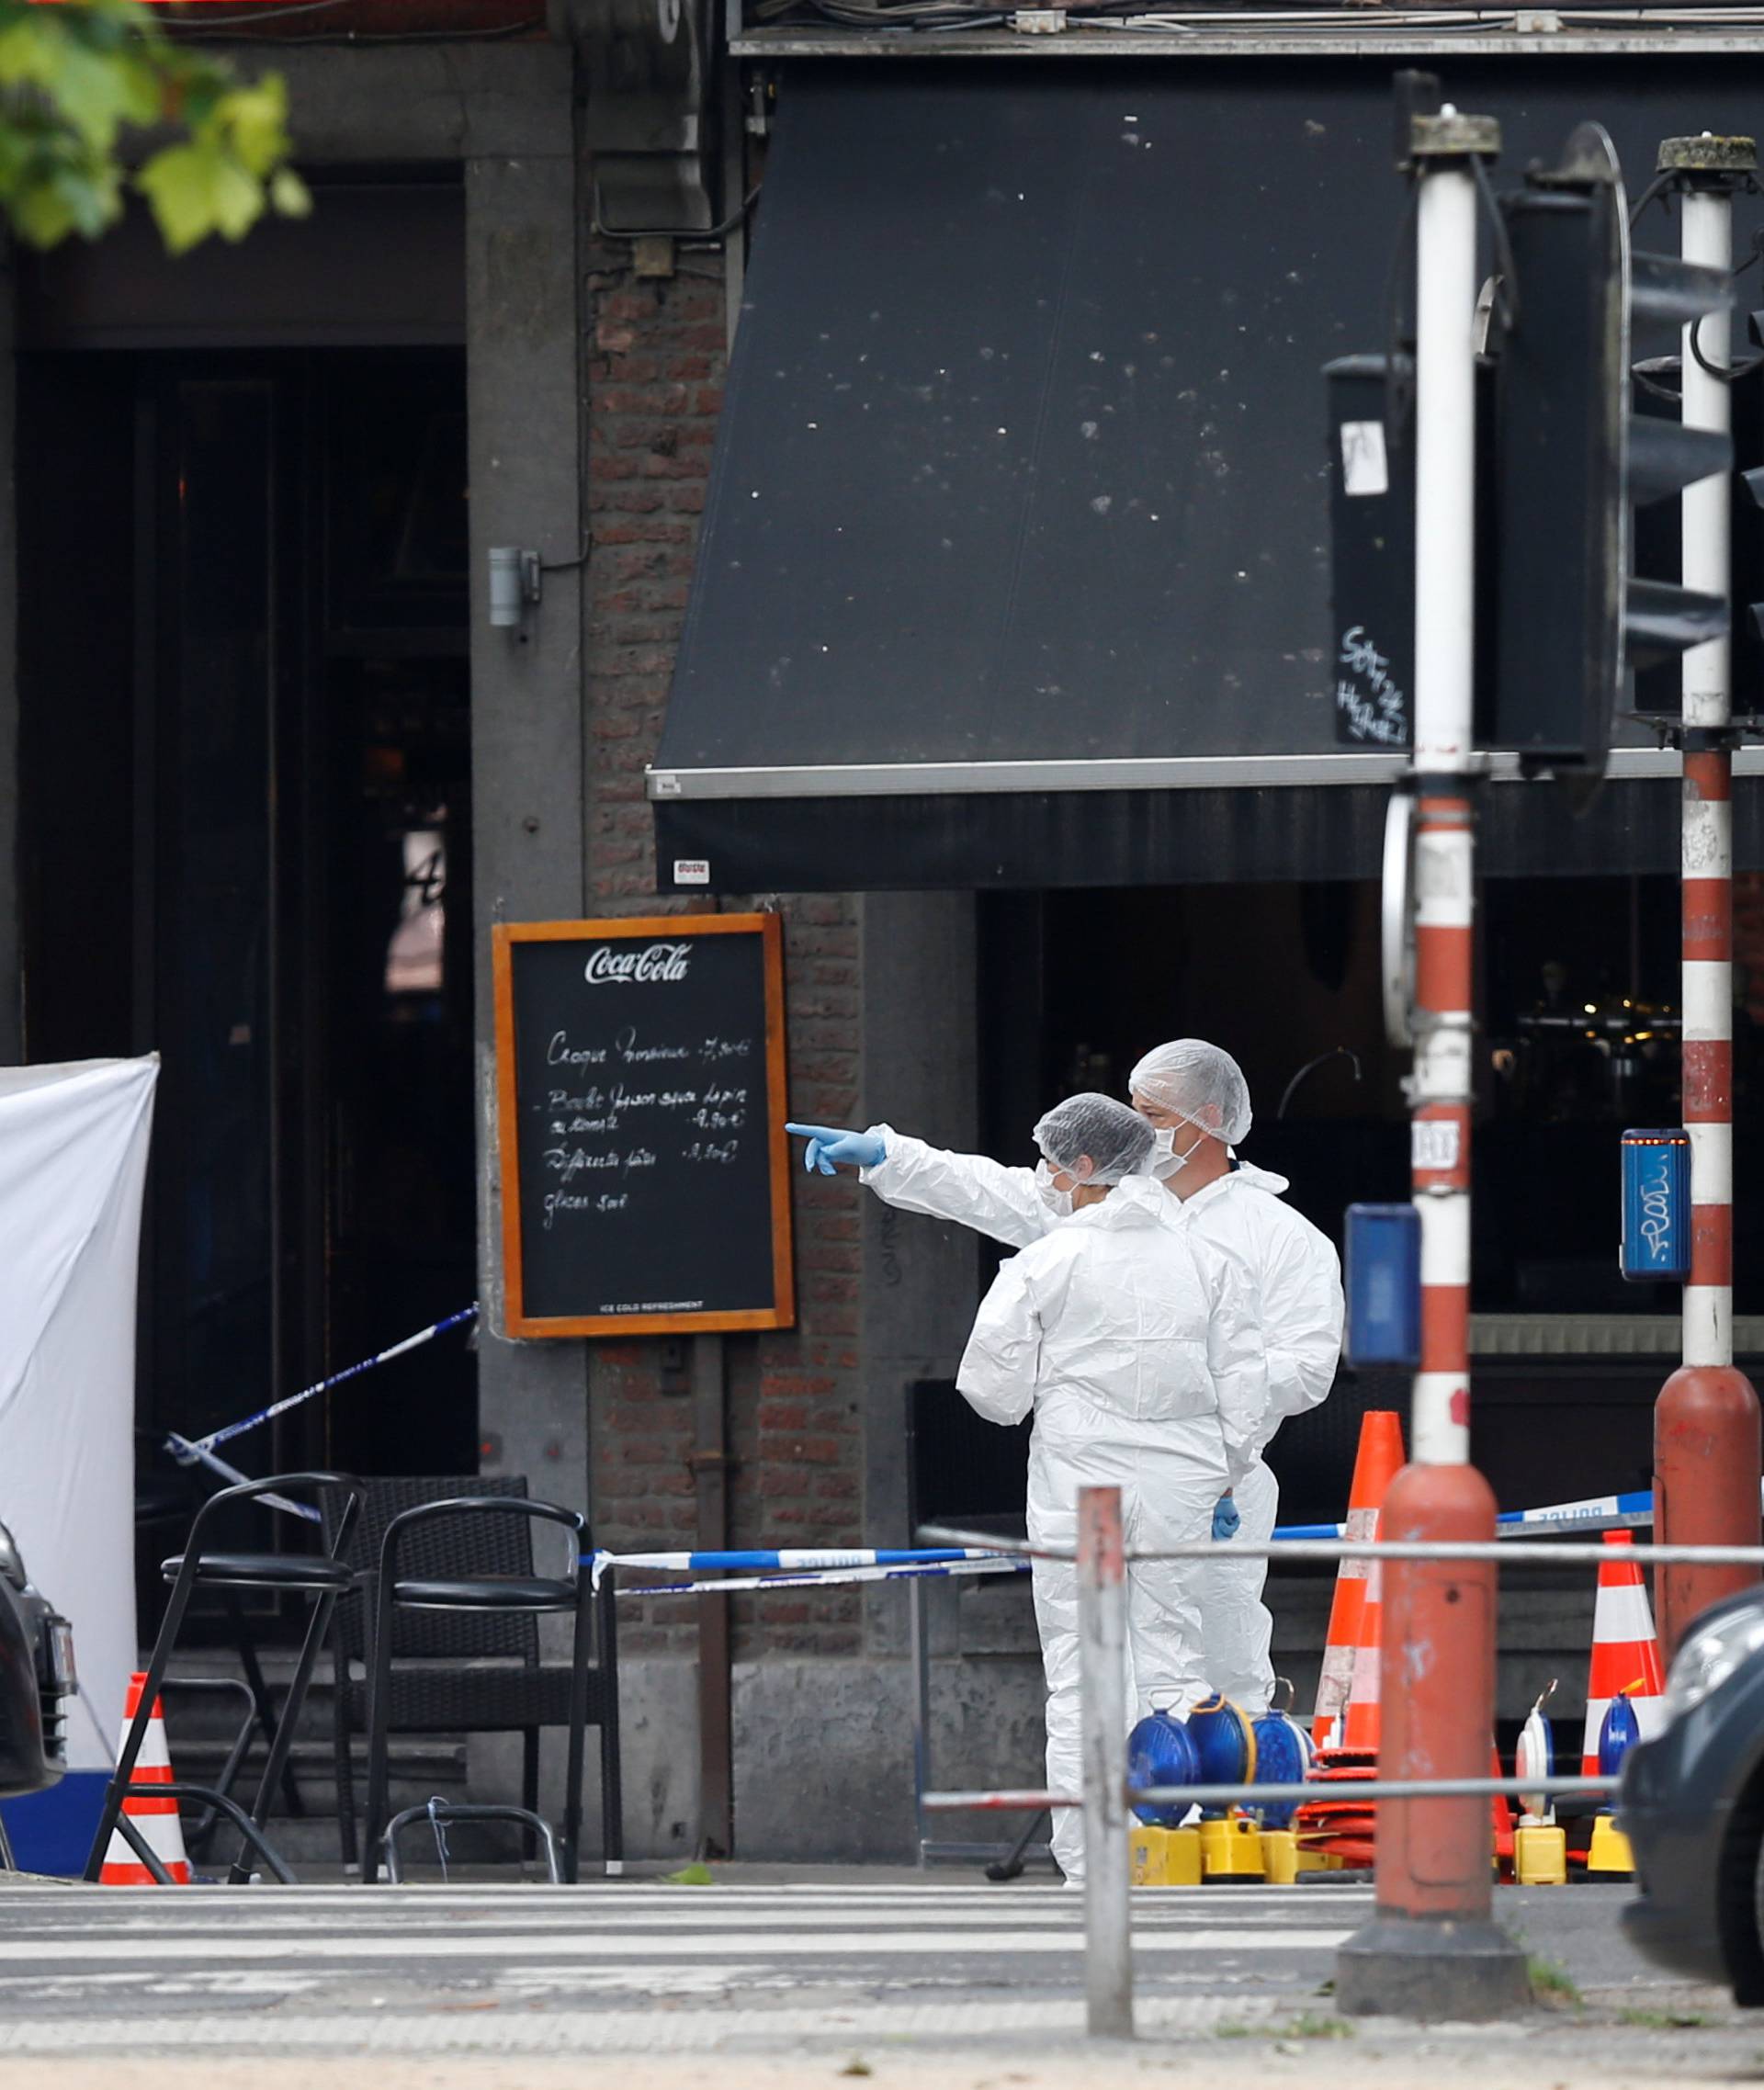 Forensics experts are seen on the scene of a shooting in Liege